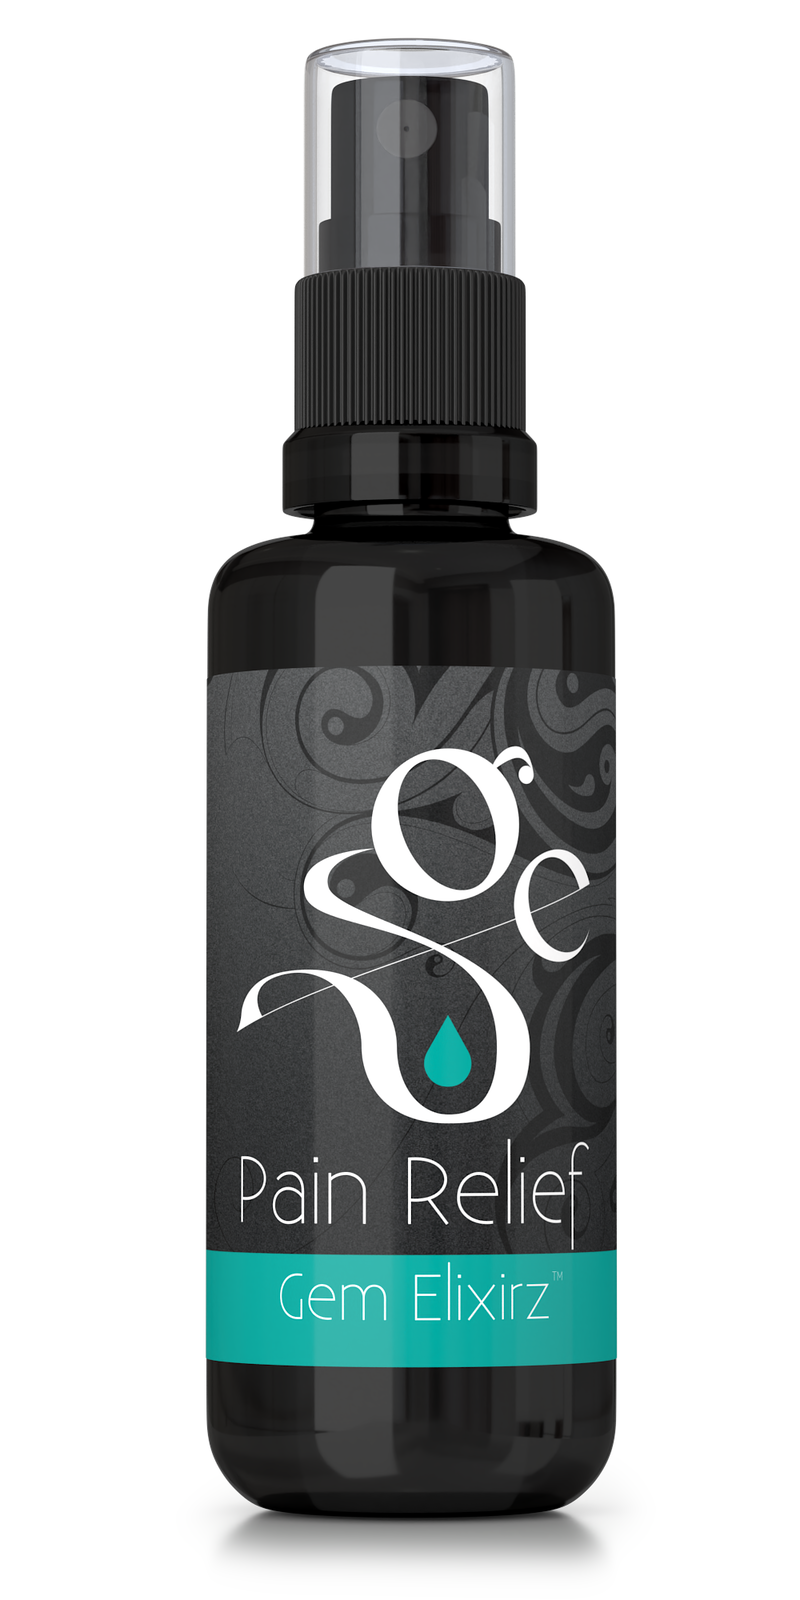 Pain Relief aromatherapy spray with essential oils and gemstones, frontside of bottle